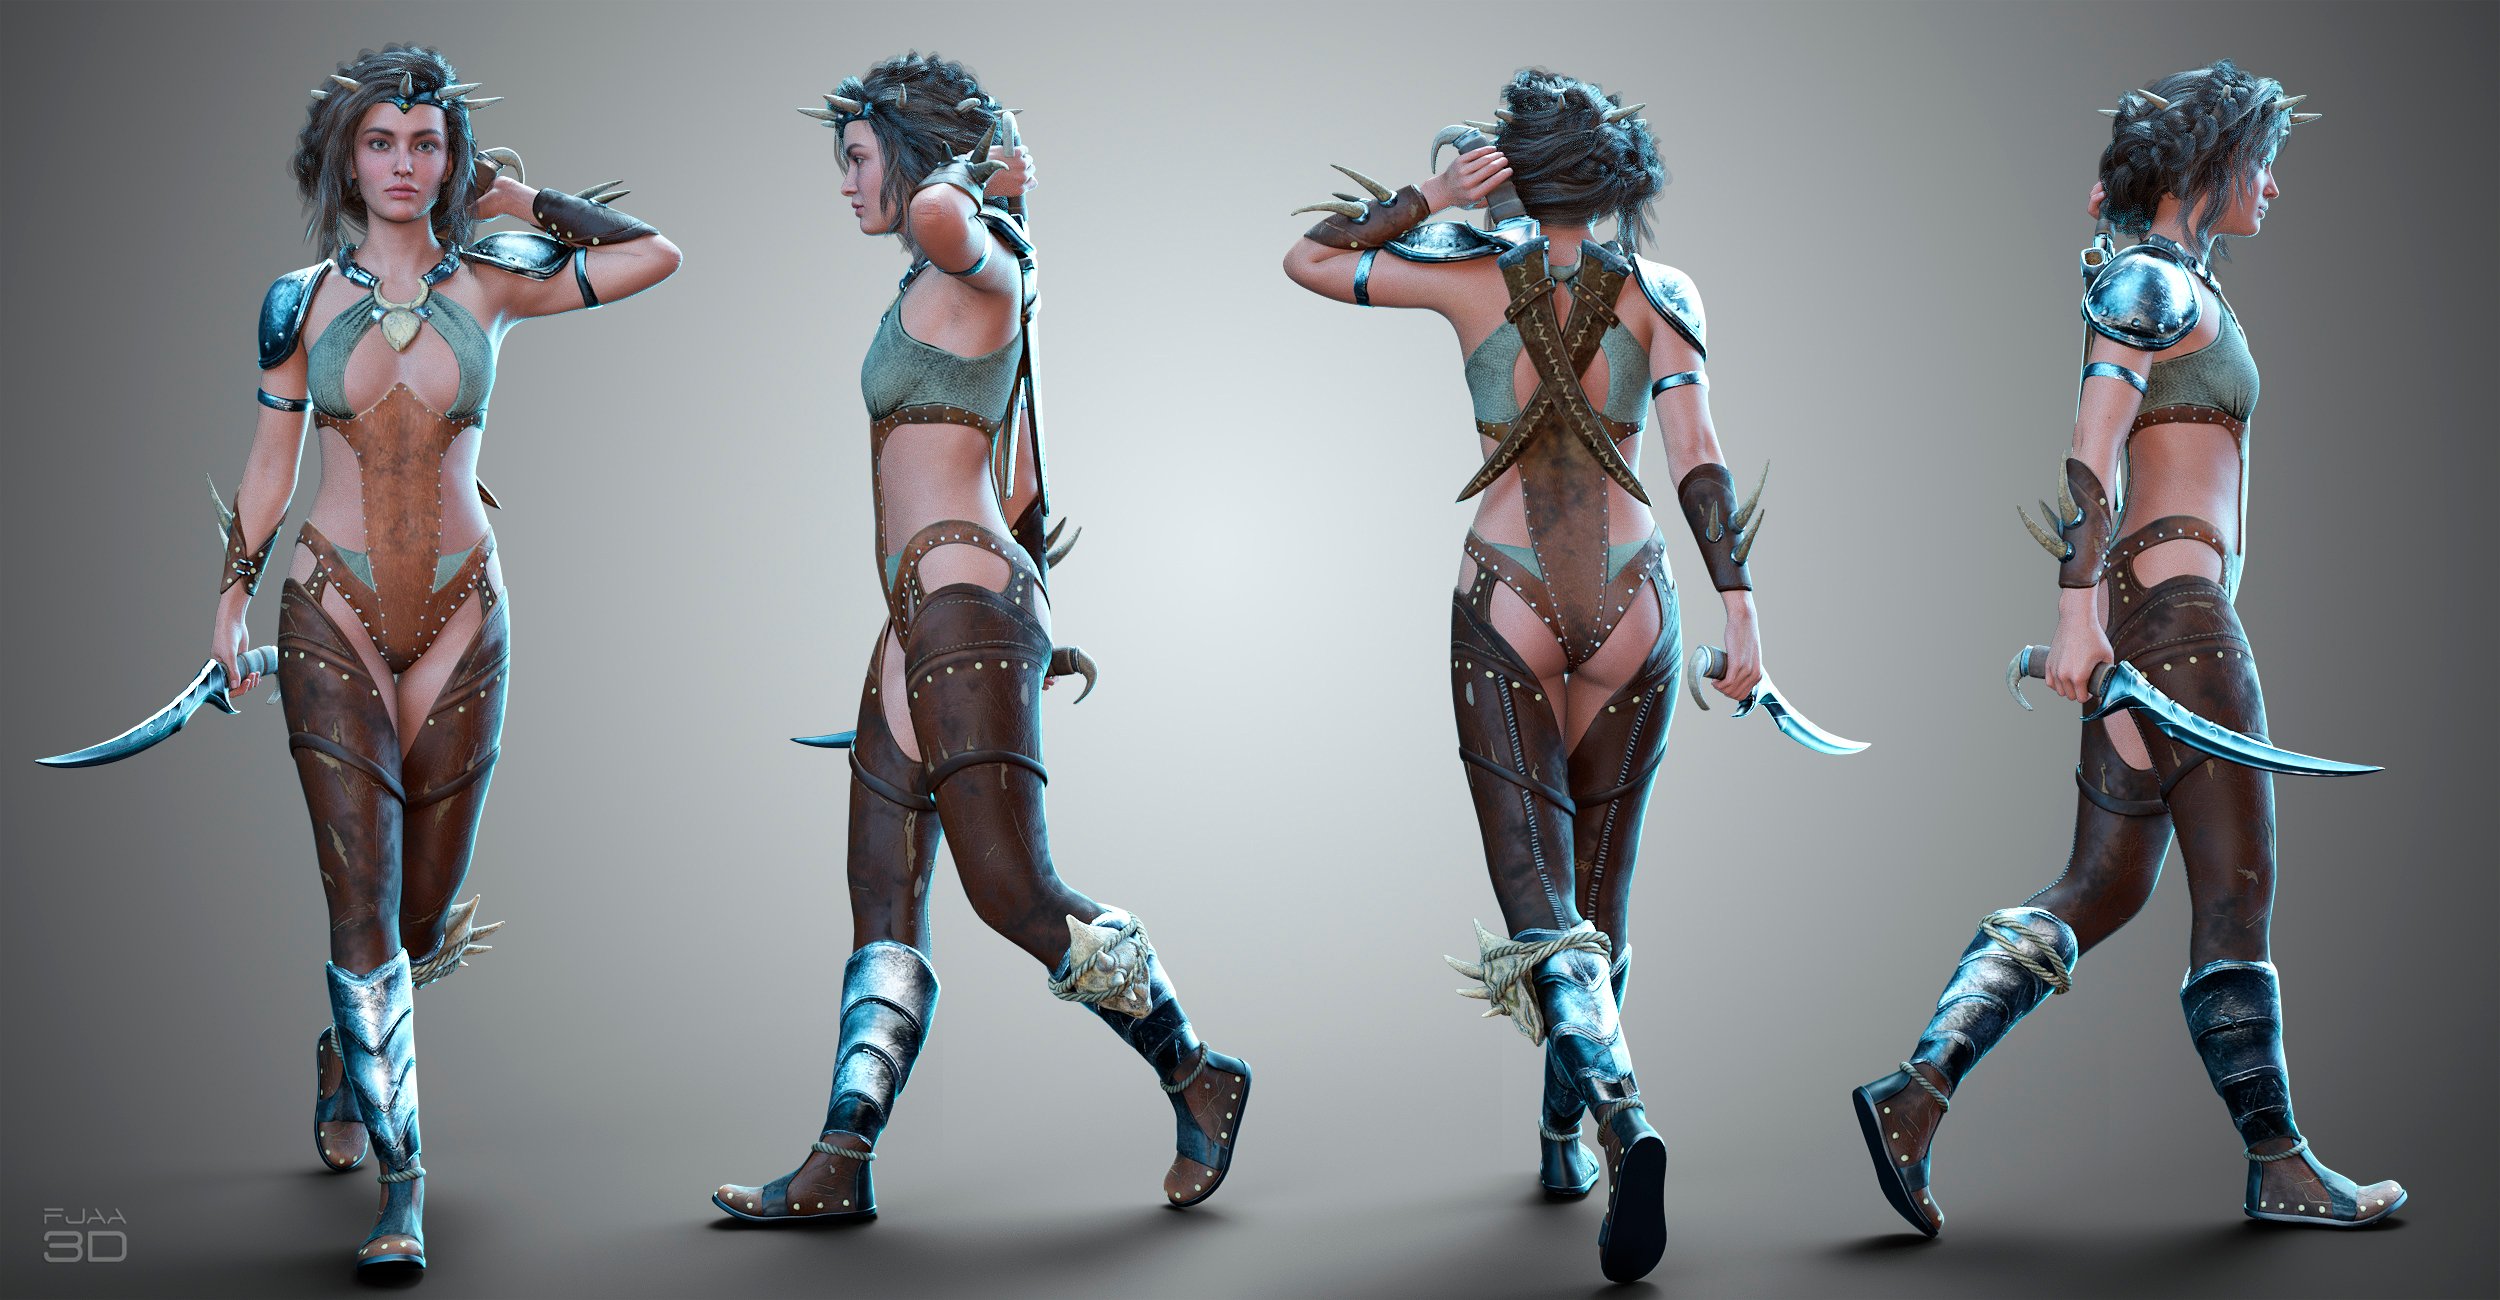 Warrior Queen Outfit V1 for Genesis 8 and 8.1 Female by: fjaa3d, 3D Models by Daz 3D